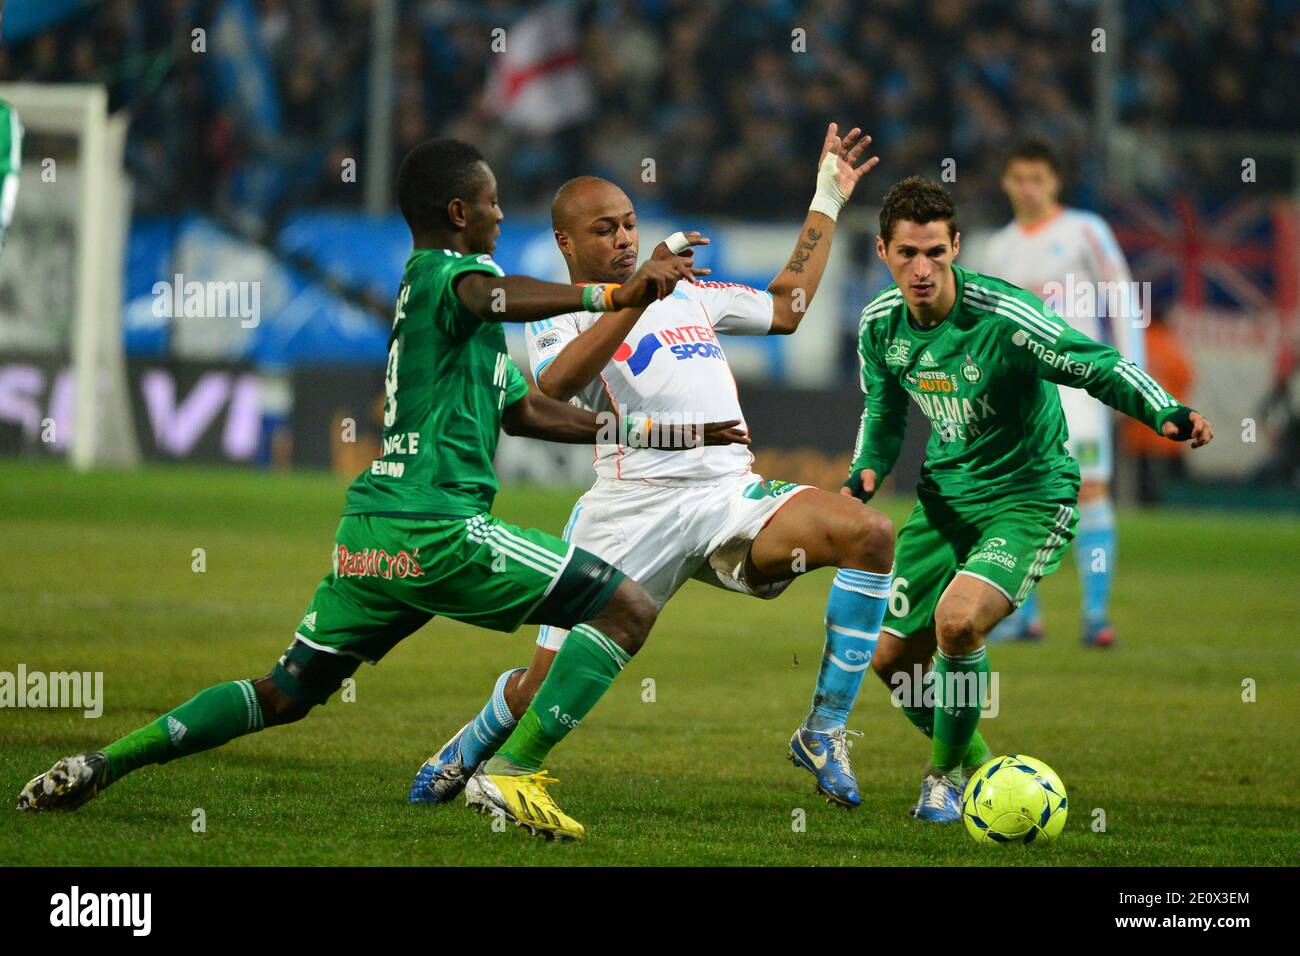 ASSE's Max Gradel, OM's Andre Ayew and ASSE's Jeremy Clement during the French First League soccer match, Olympique de Marseille Vs As Saint-Etienne at Velodrome stadium in Marseille, France on December 23, 2012. OM won 1-0. Photo by Felix Golesi/ABACAPRESS.COM Stock Photo